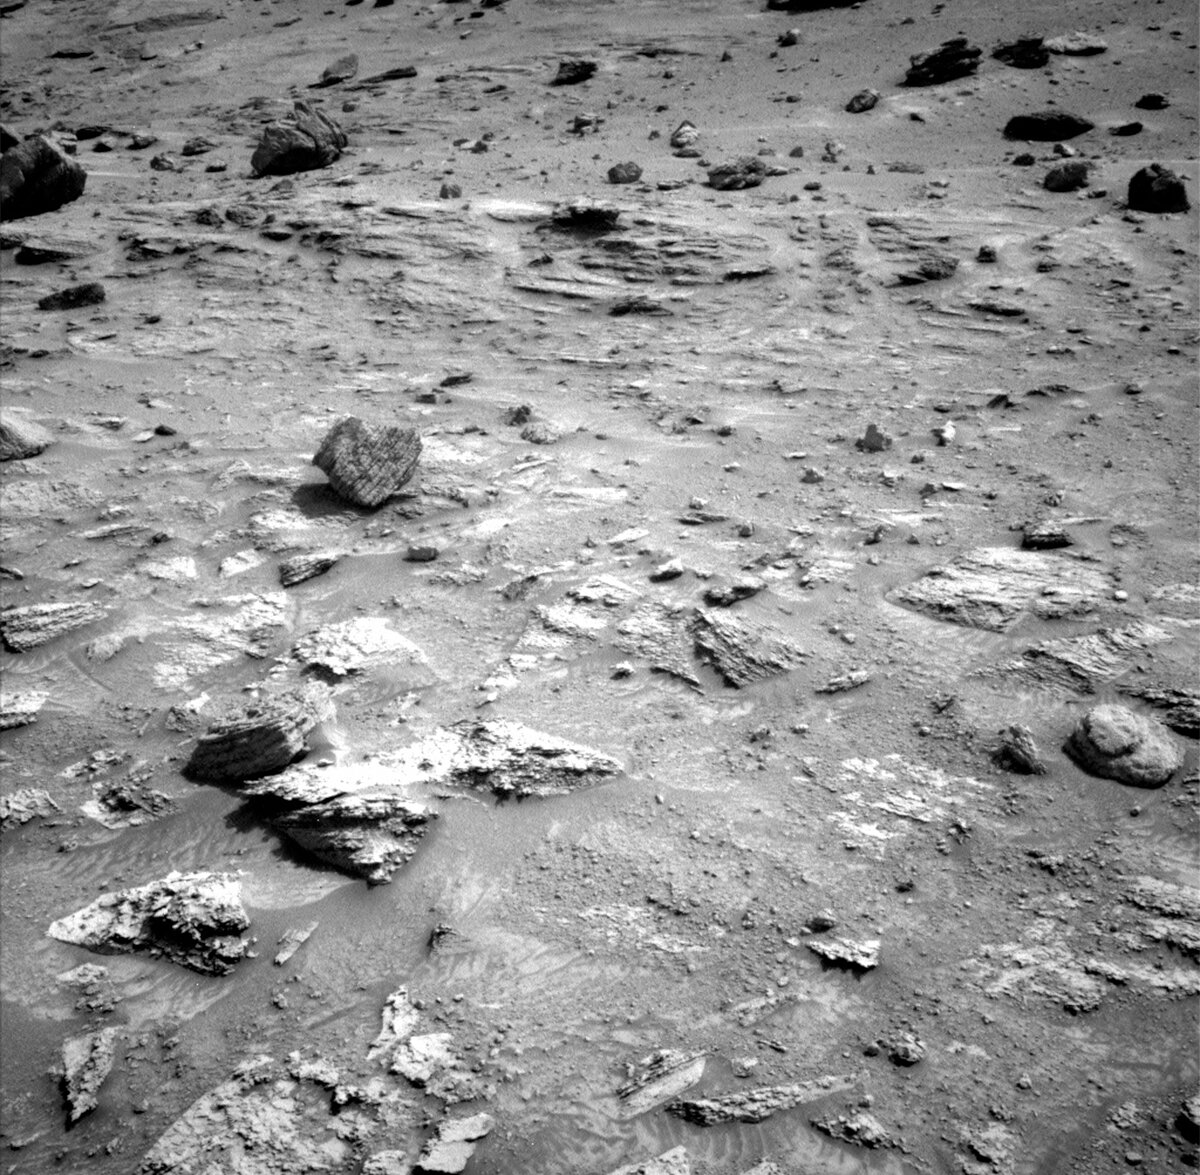 This image was taken by Left Navigation Camera onboard NASA's Mars rover Curiosity on Sol 3540, showing target 'Merume.'